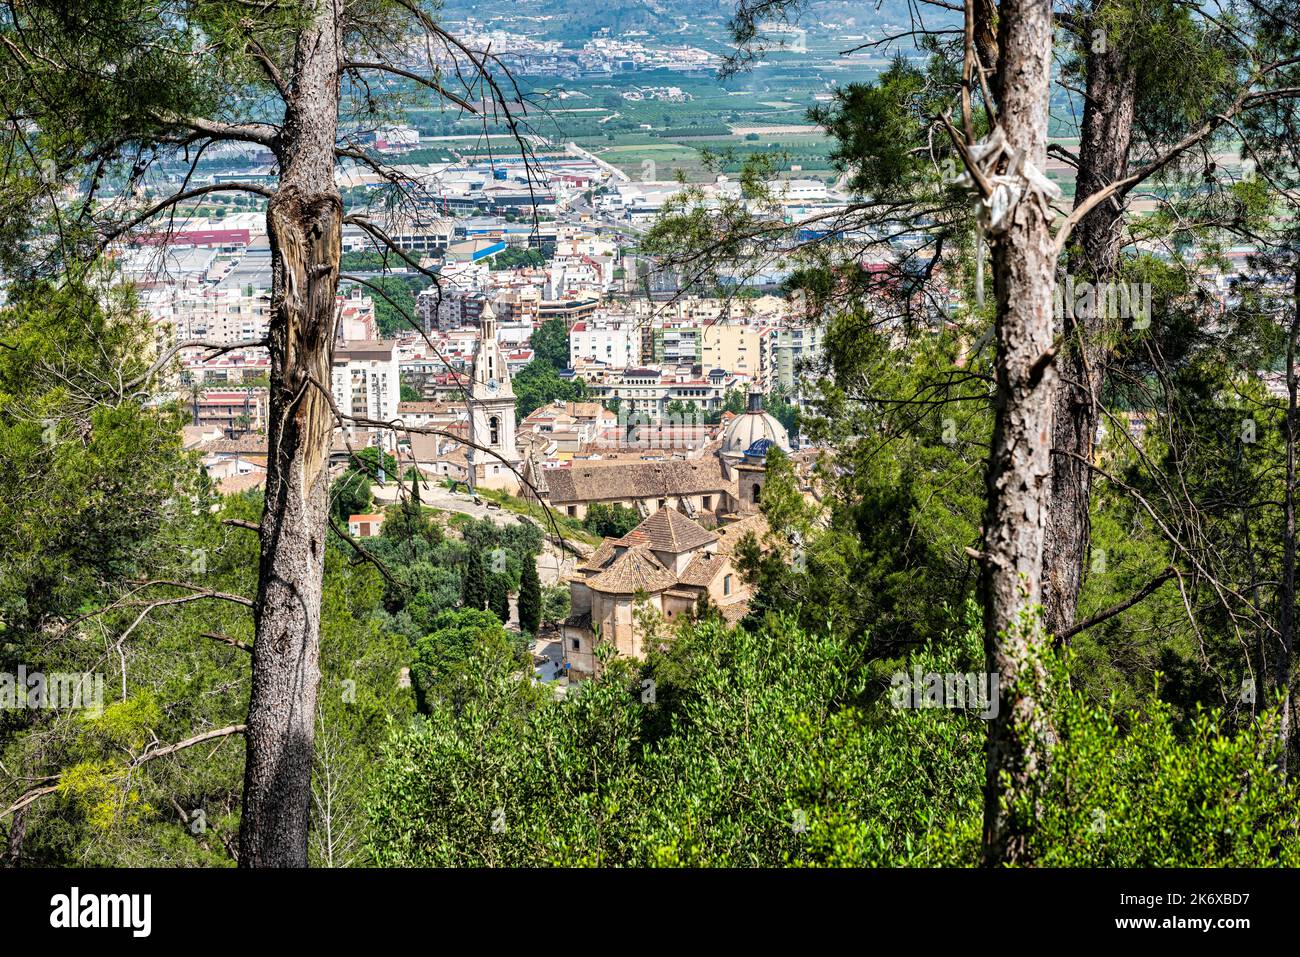 View of the Town of Xativa and The Collegiate Basilica of Santa Maria an hour outside of Valencia in Spain Stock Photo